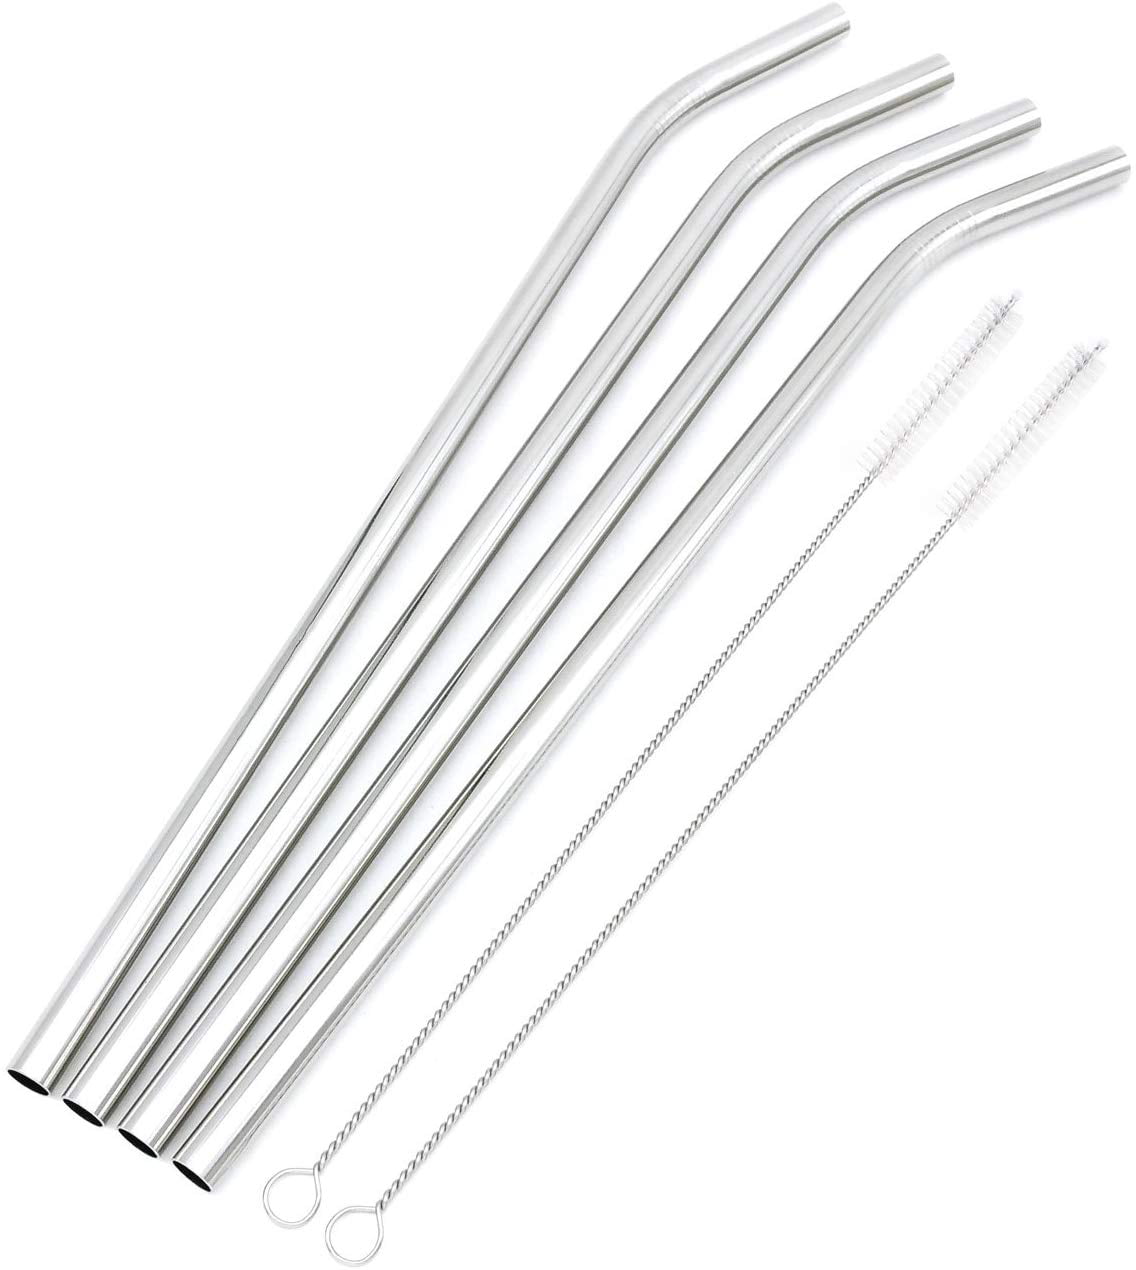 Big Drinking Straws Reusable 12 Inches Extra Long 9mm Extra Wide SUS 12 Inch Stainless Steel Drinking Straws